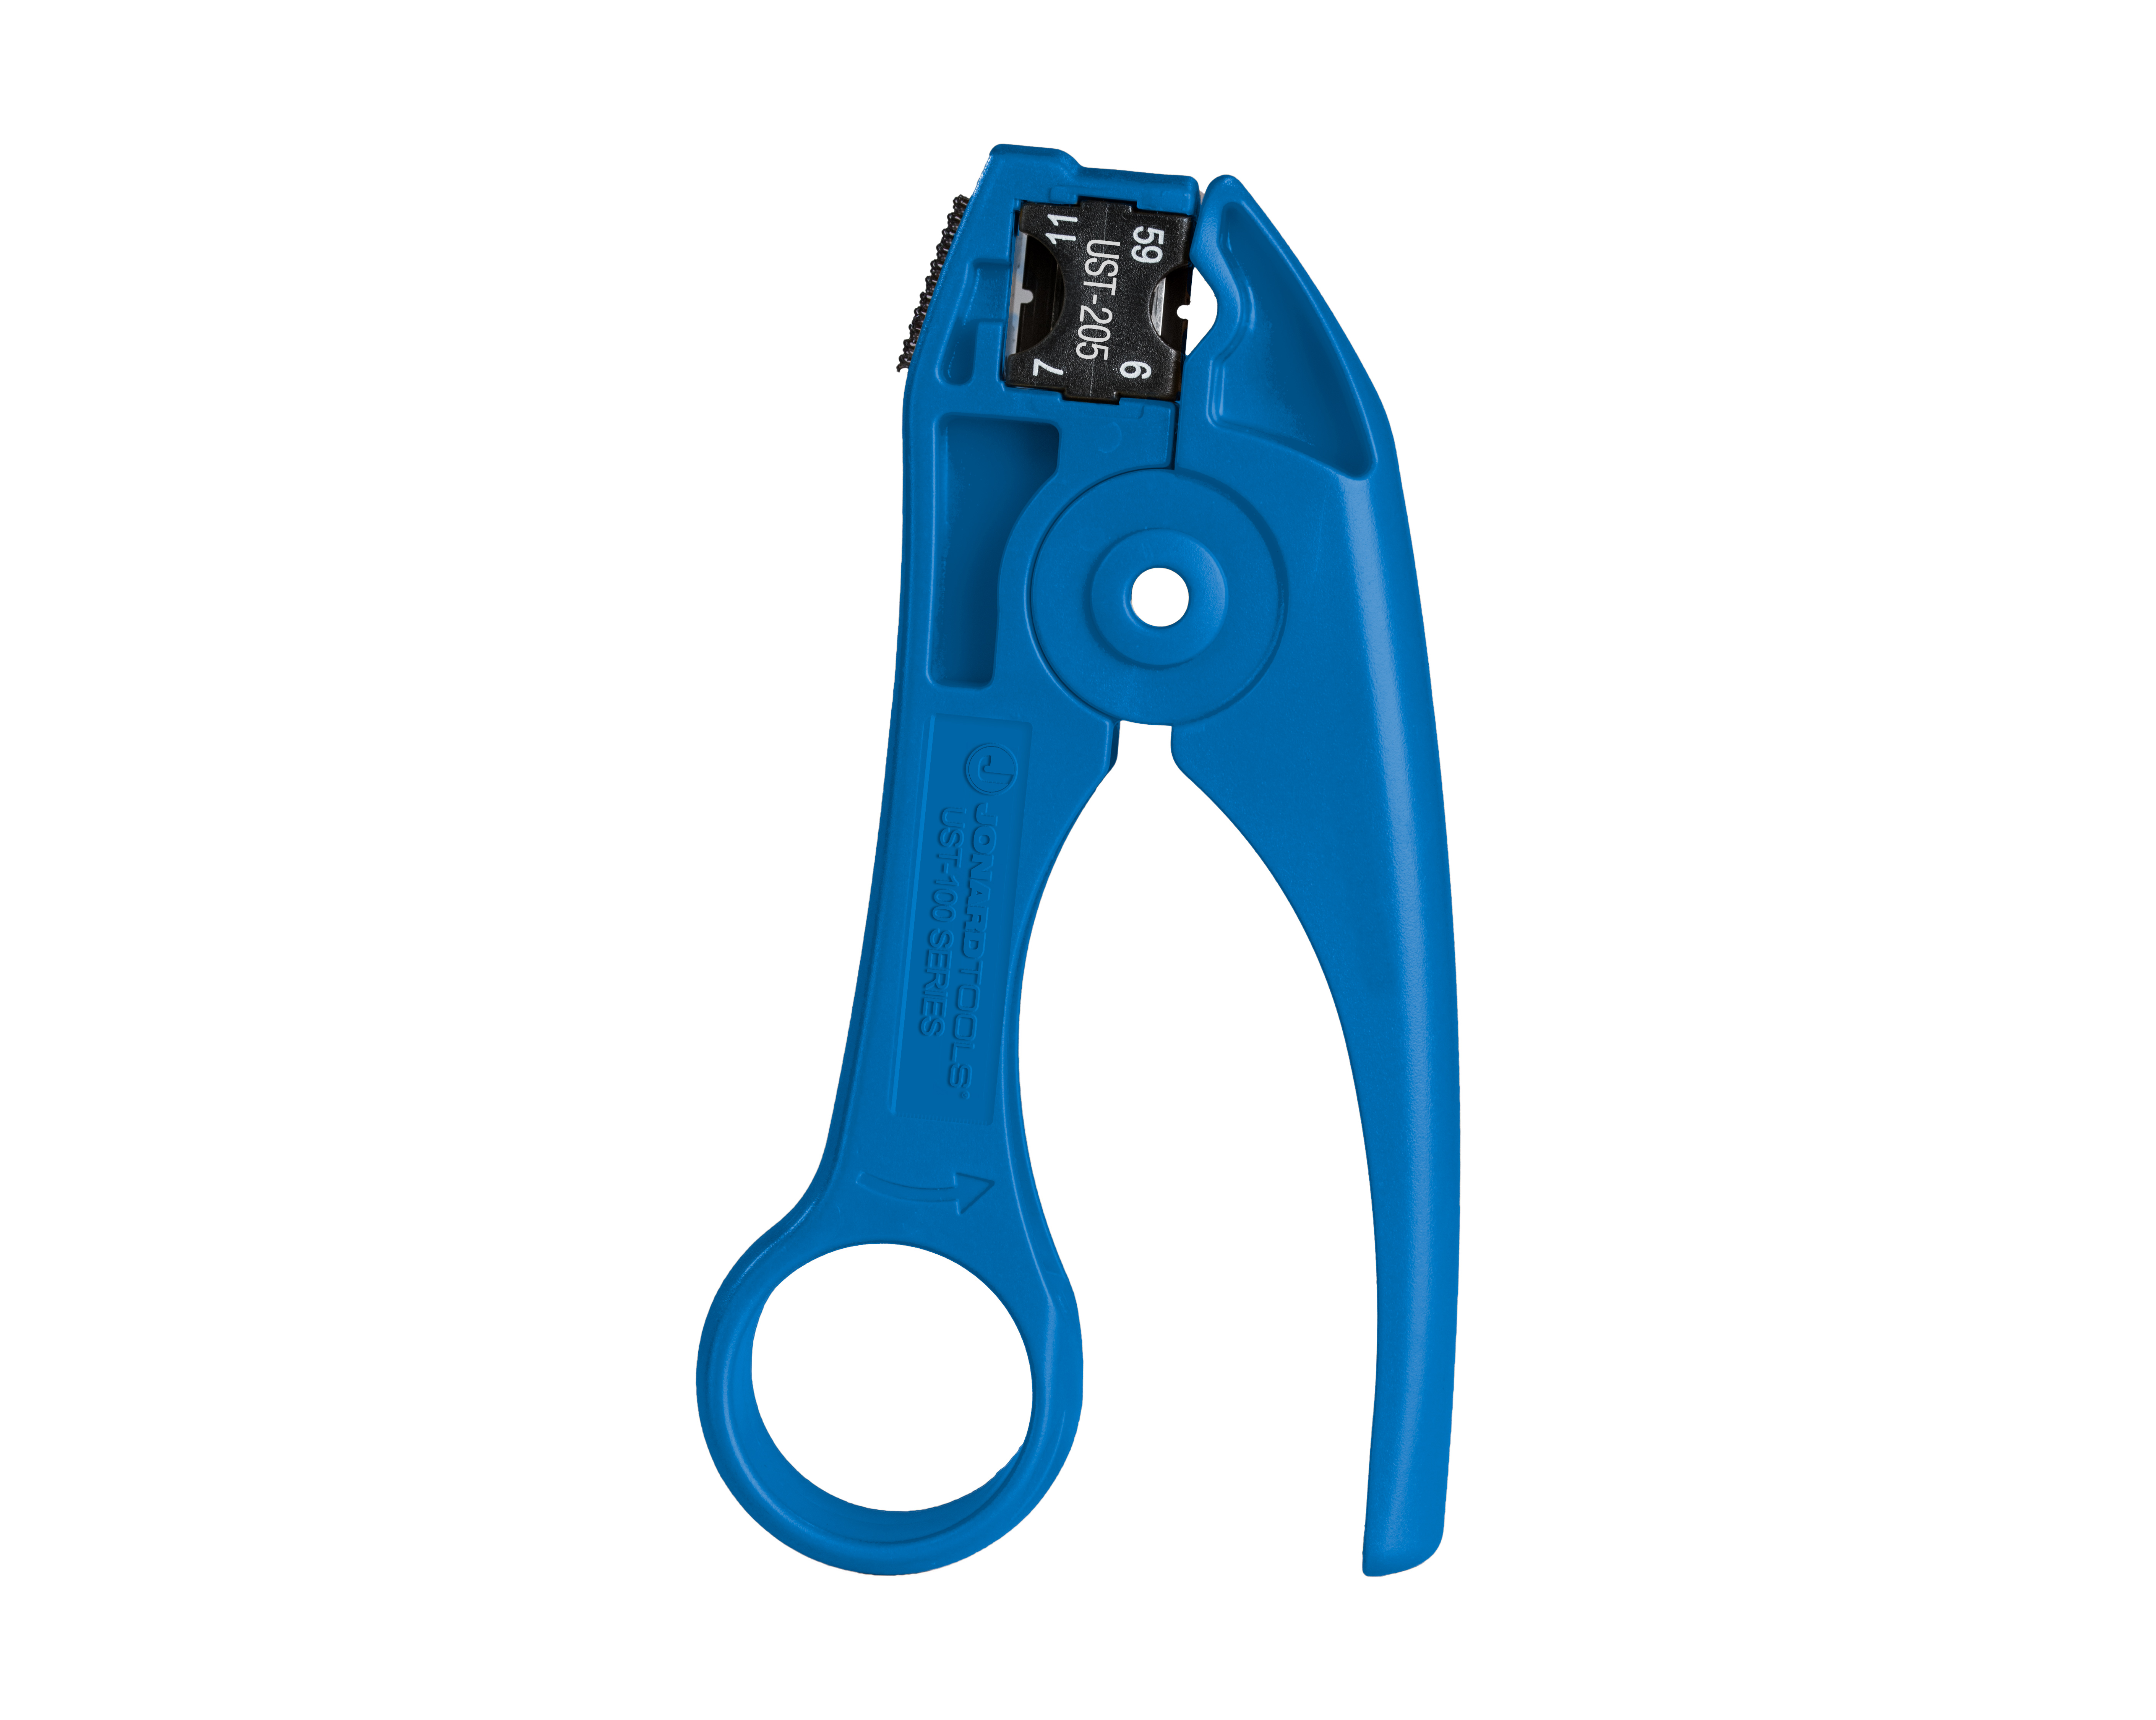 Cable Stripper For RG59 RG6 RG11 Coaxial Wire Coax Stripping Tool Universal USA 